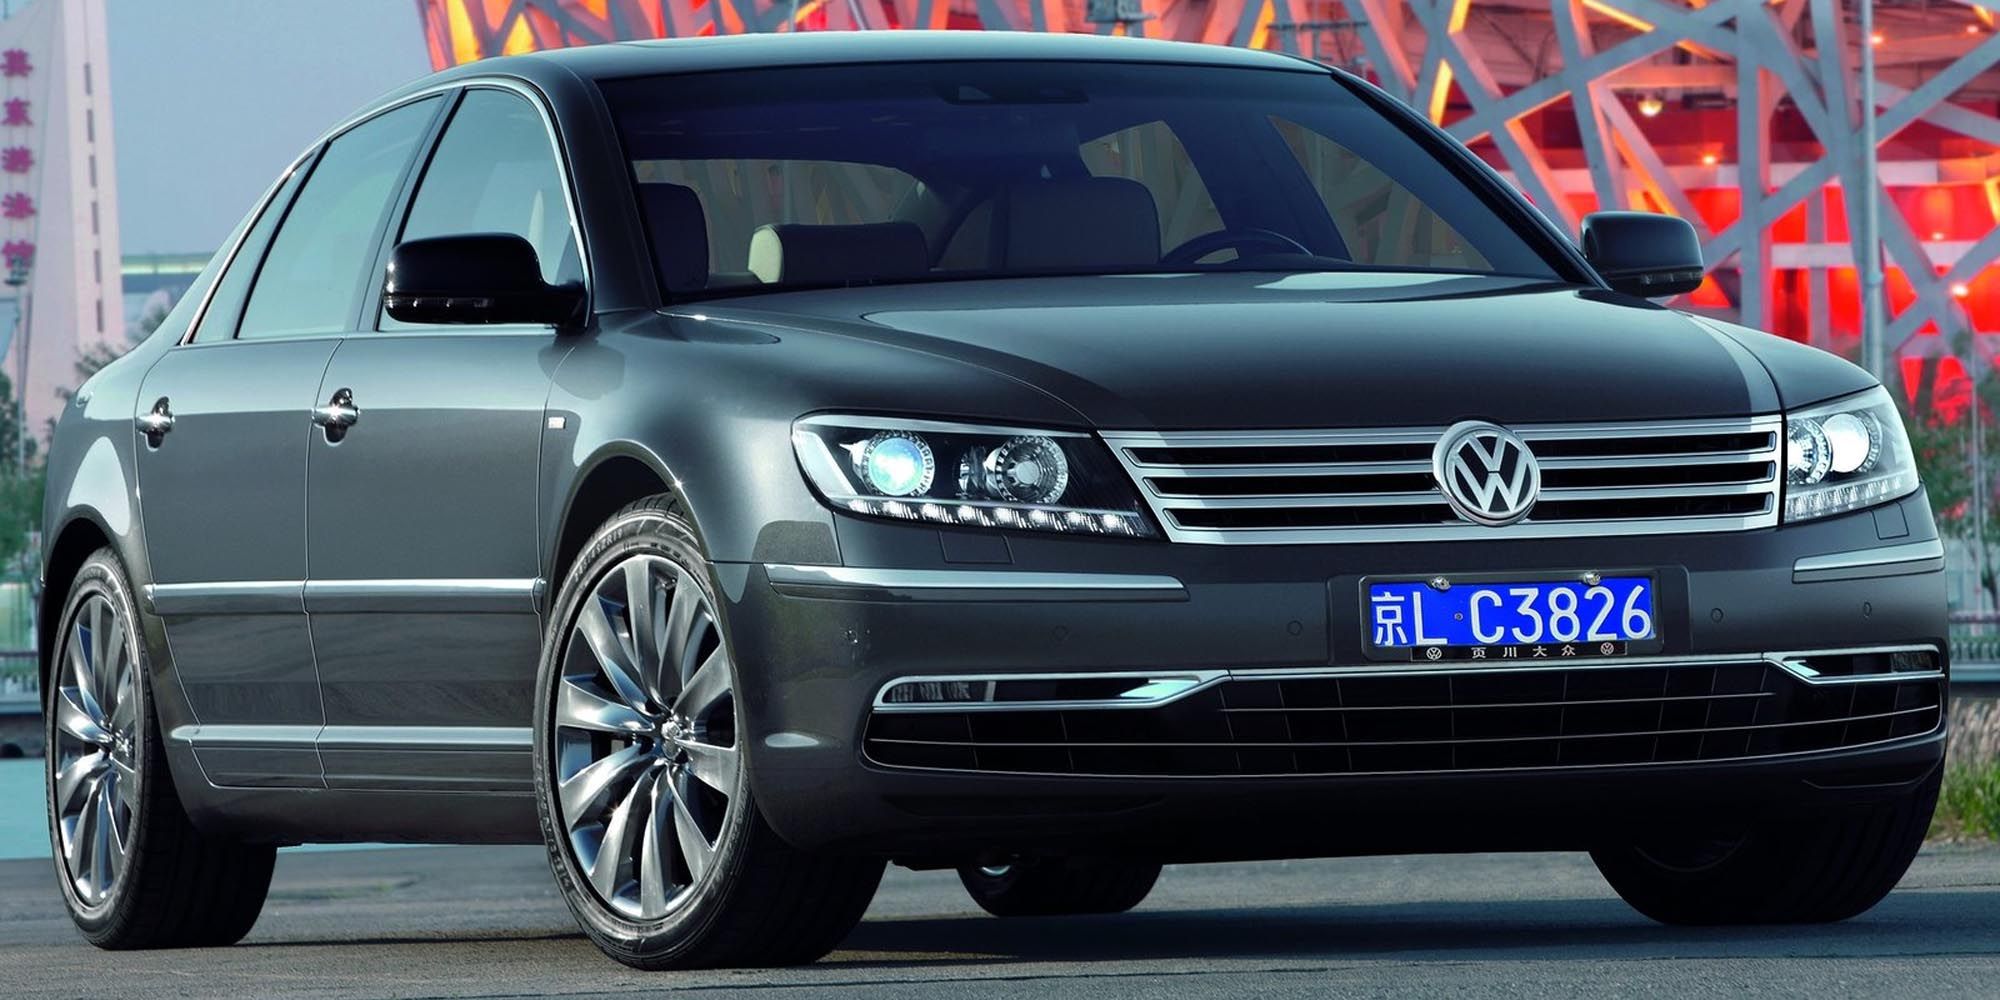 The front of the facelifted VW Phaeton